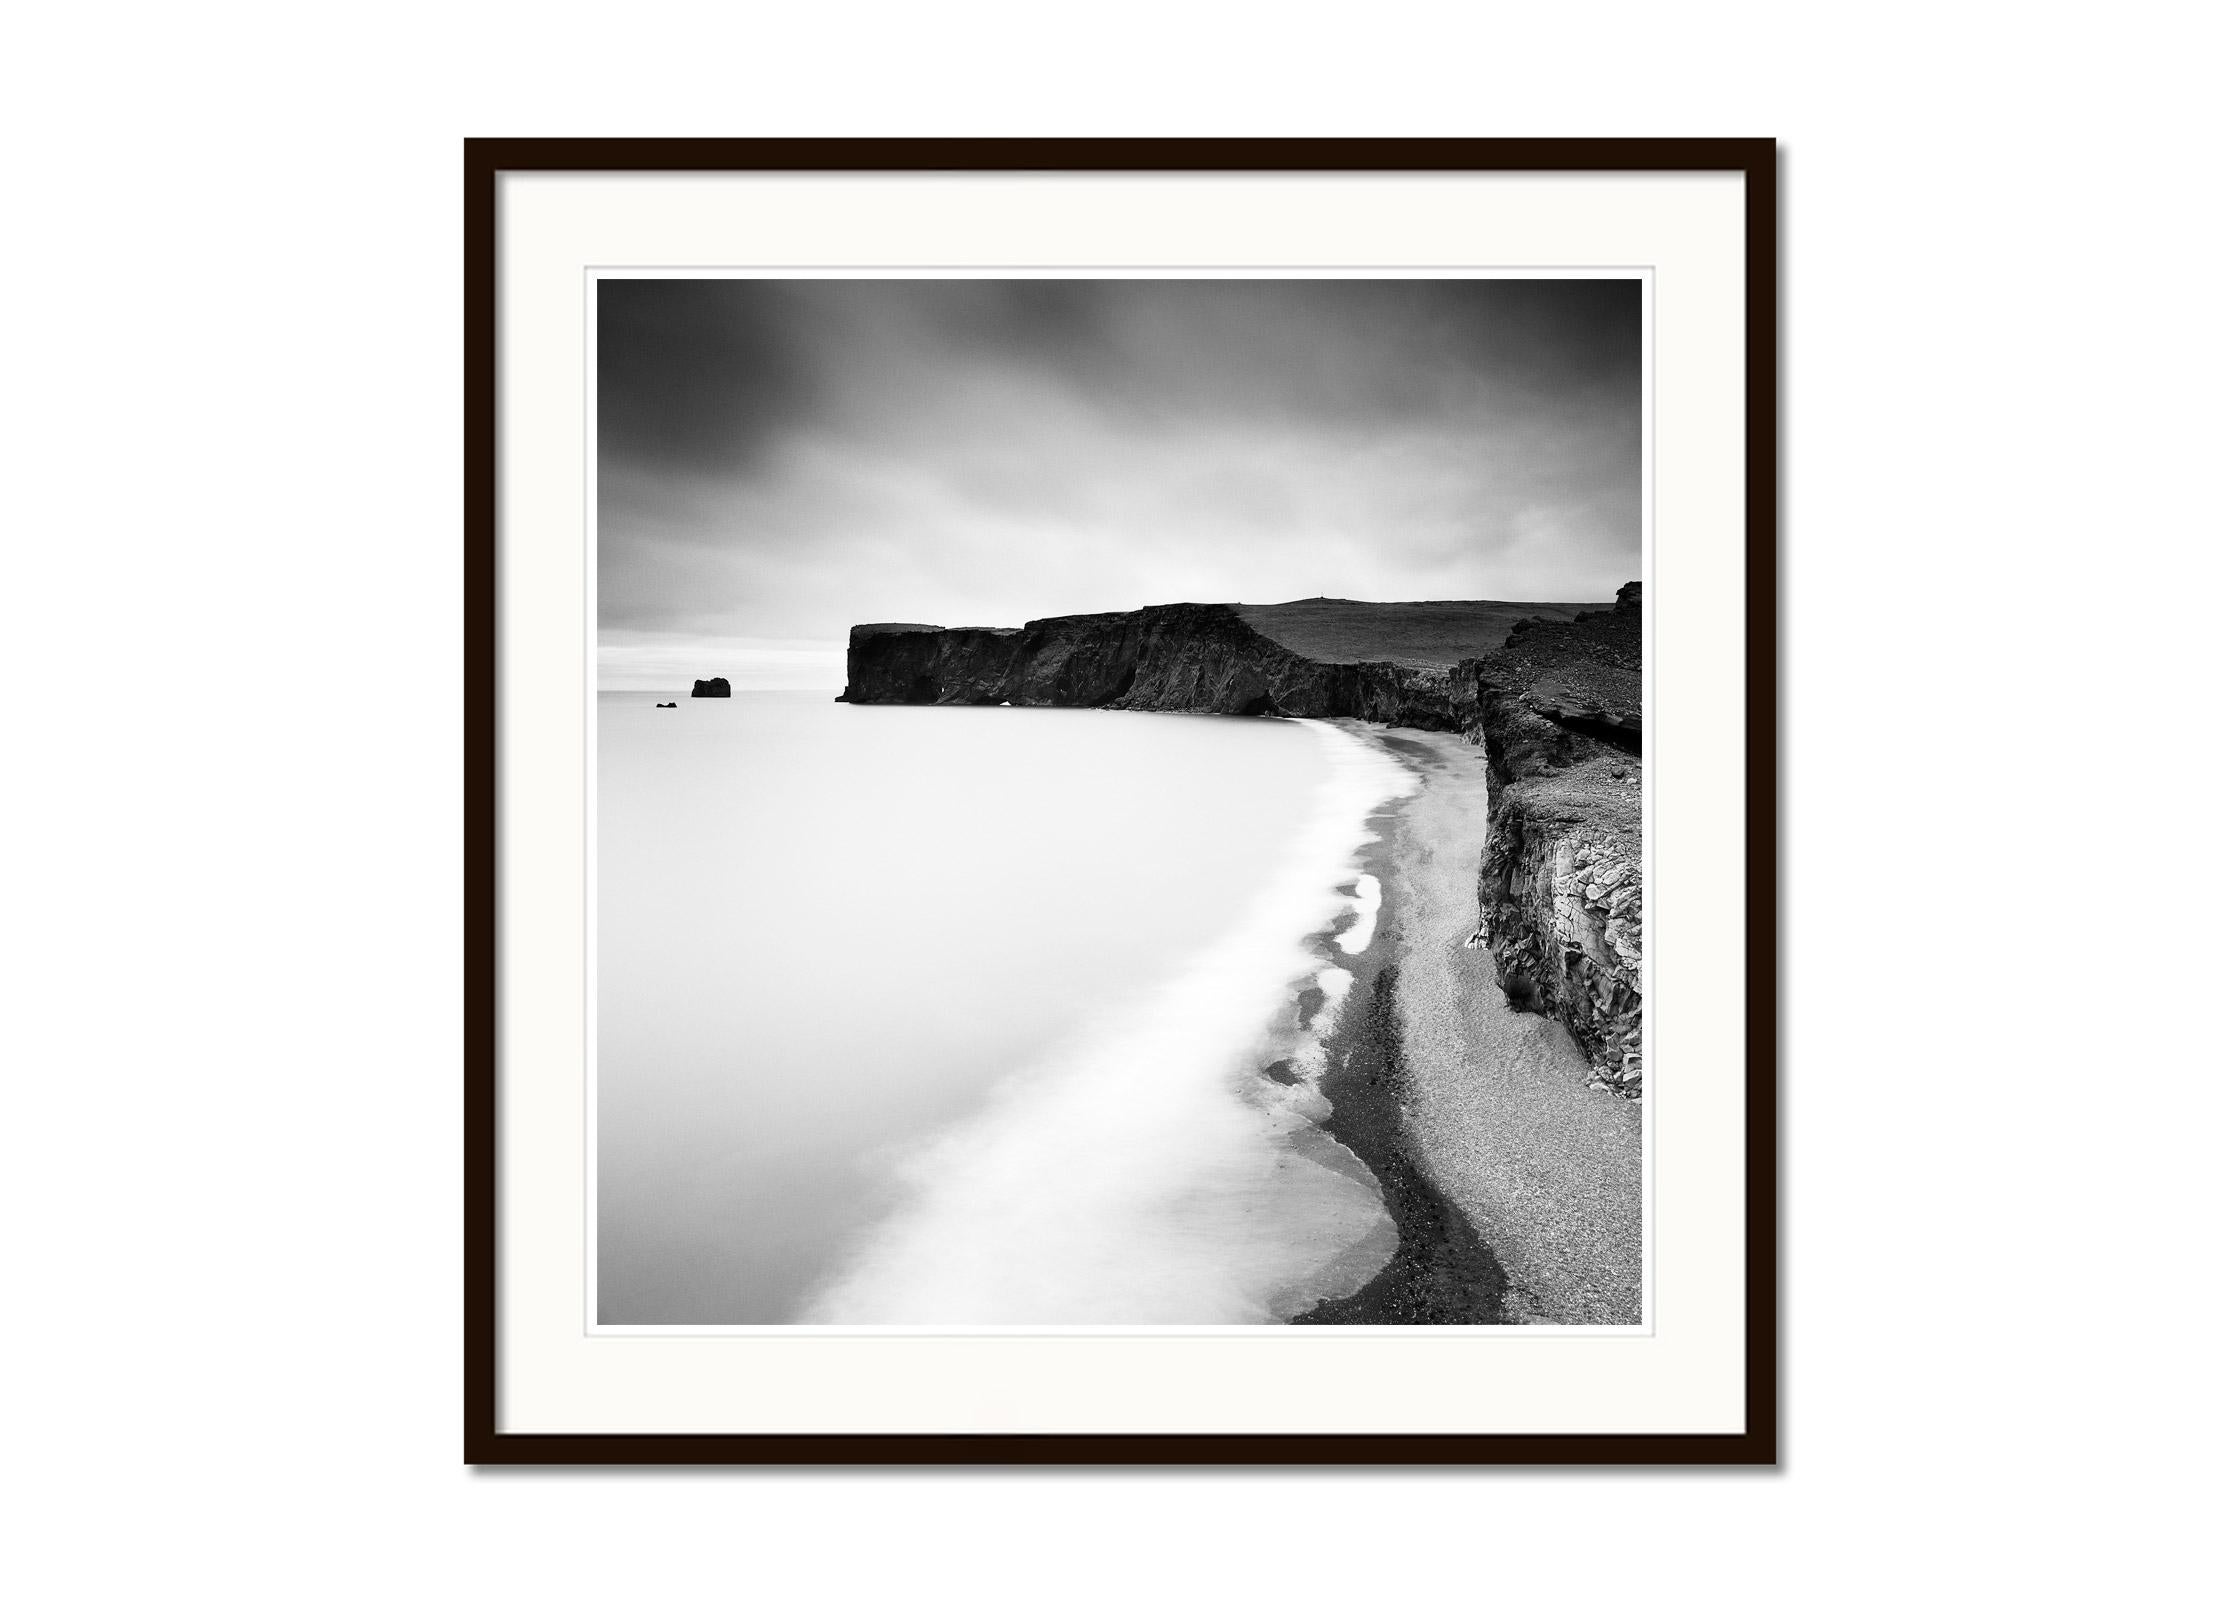 Detached Island, coast, Iceland, black and white fineart landscape photography - Contemporary Photograph by Gerald Berghammer